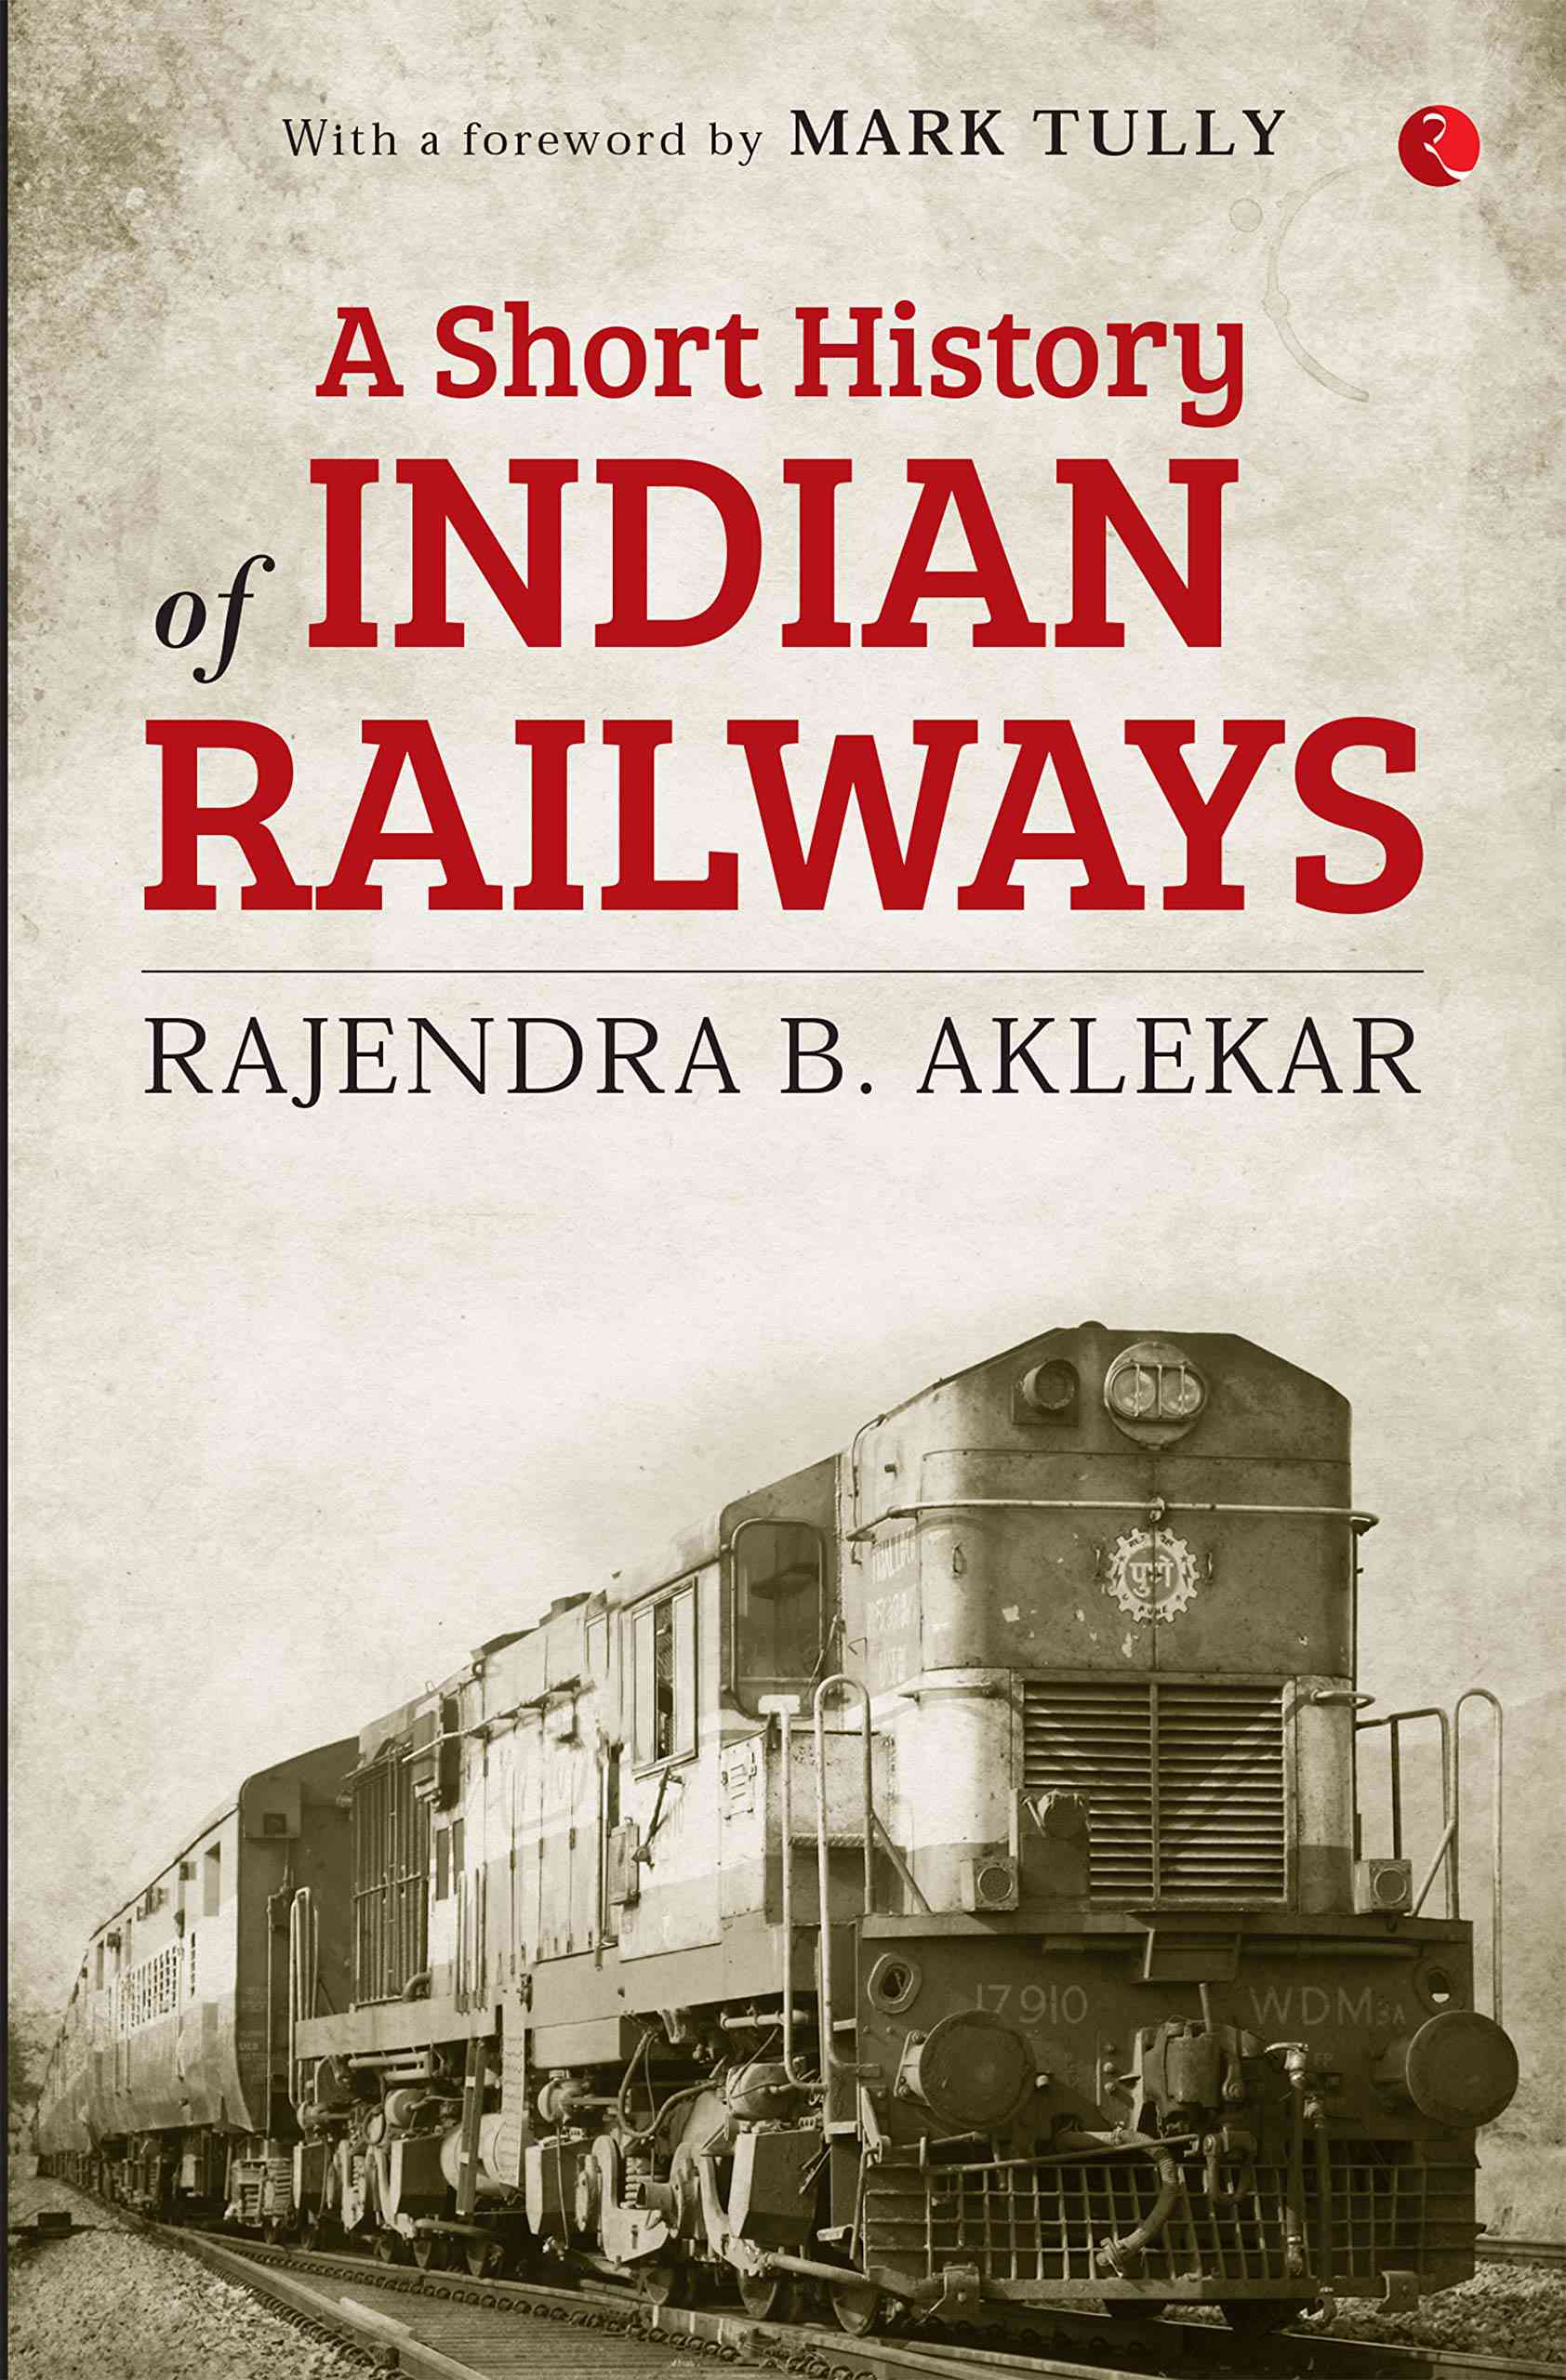 "A Short History of Indian Railways" title book penned by Rajendra B Aklekar_40.1